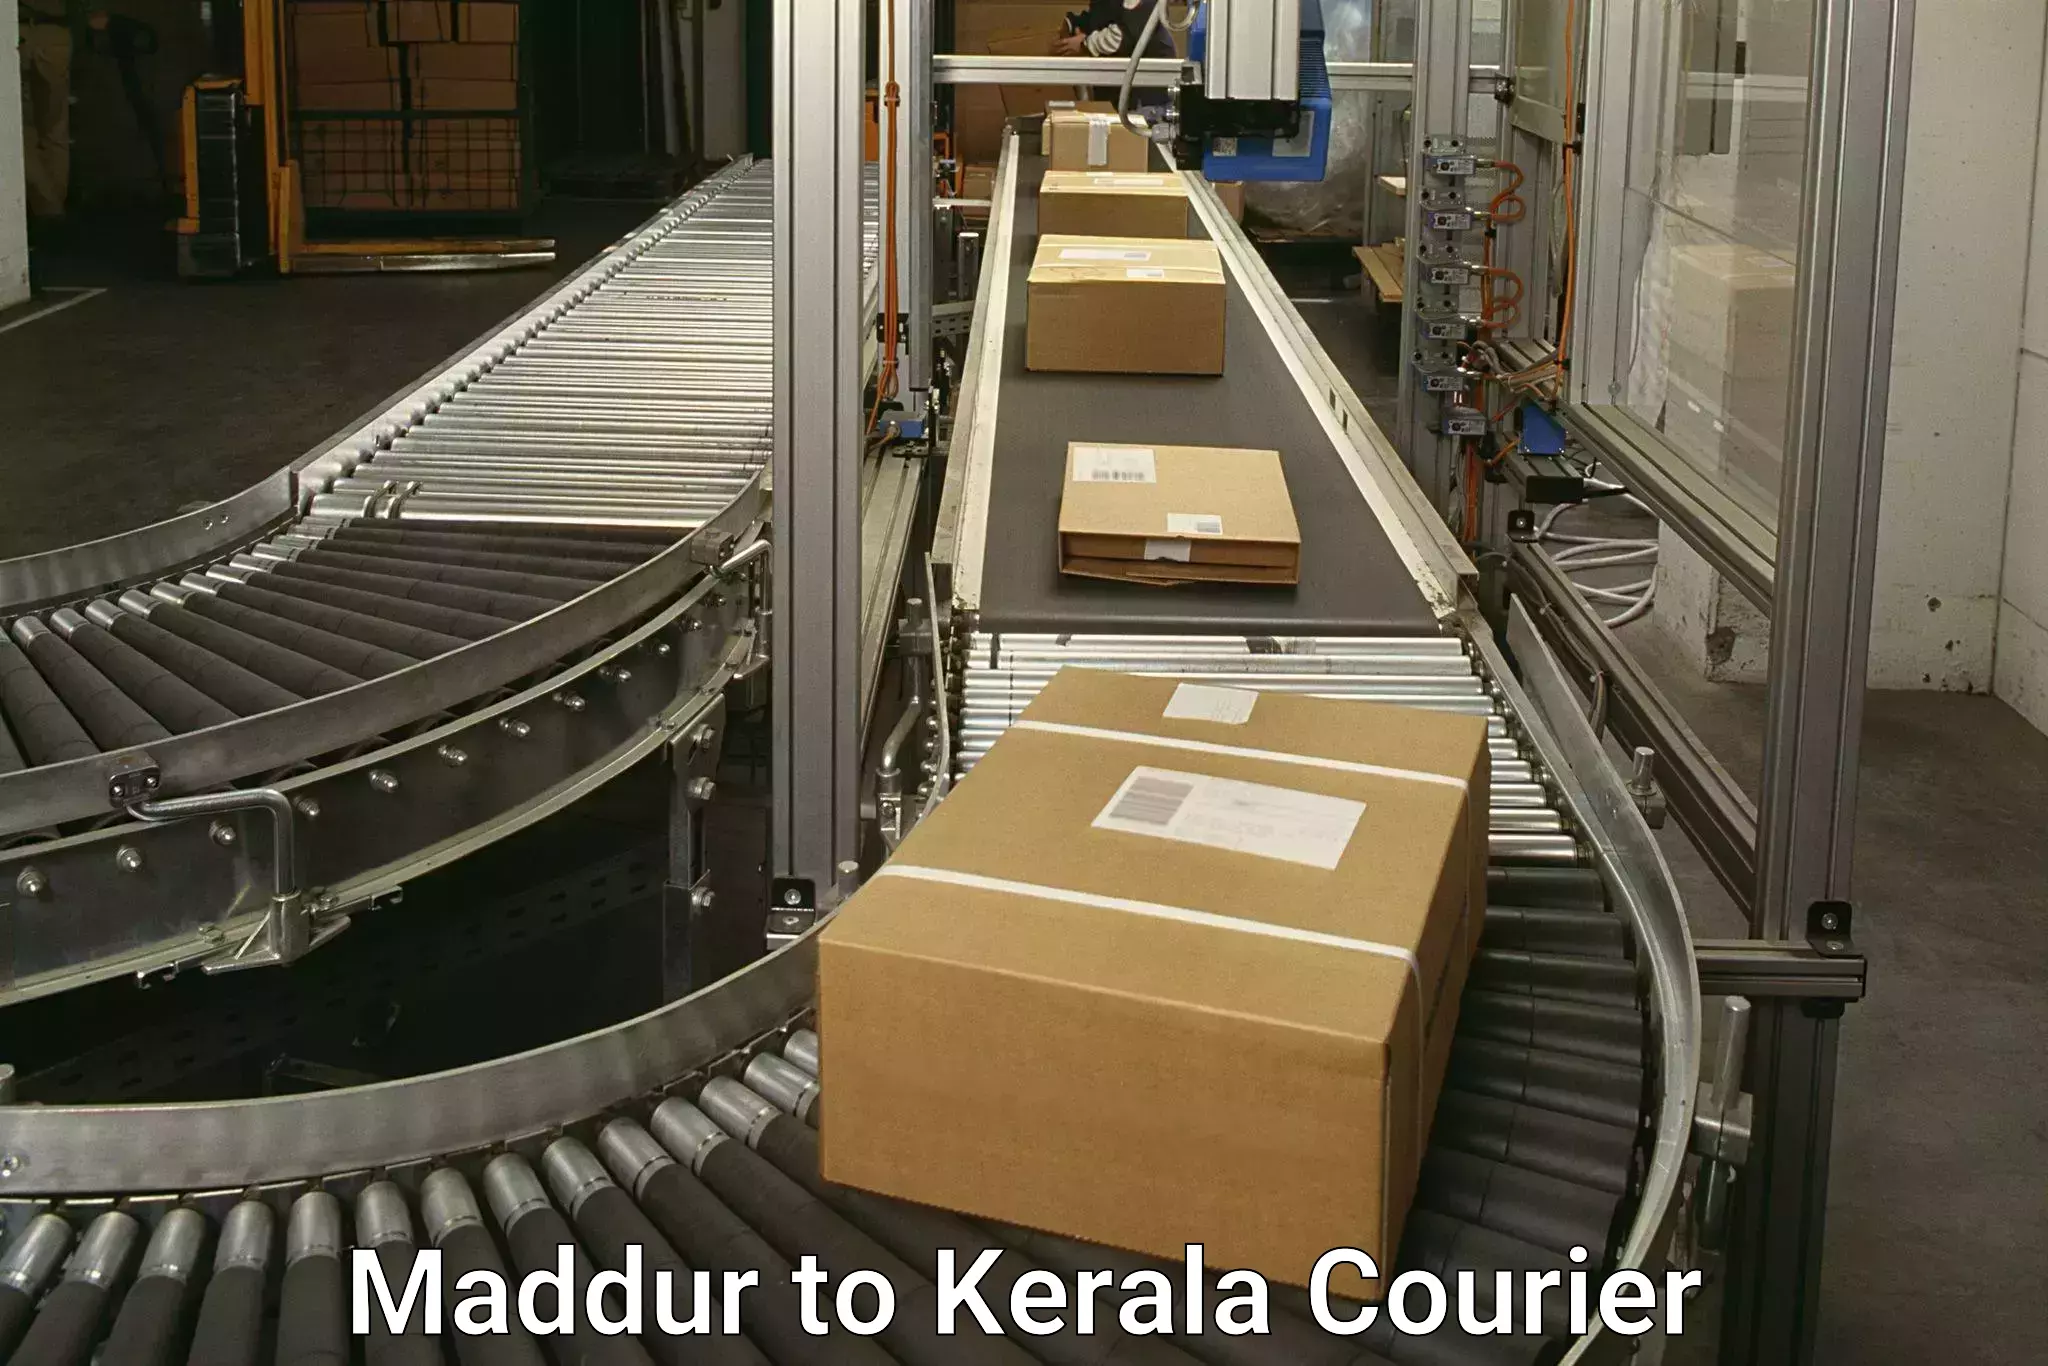 Package delivery network Maddur to Payyanur